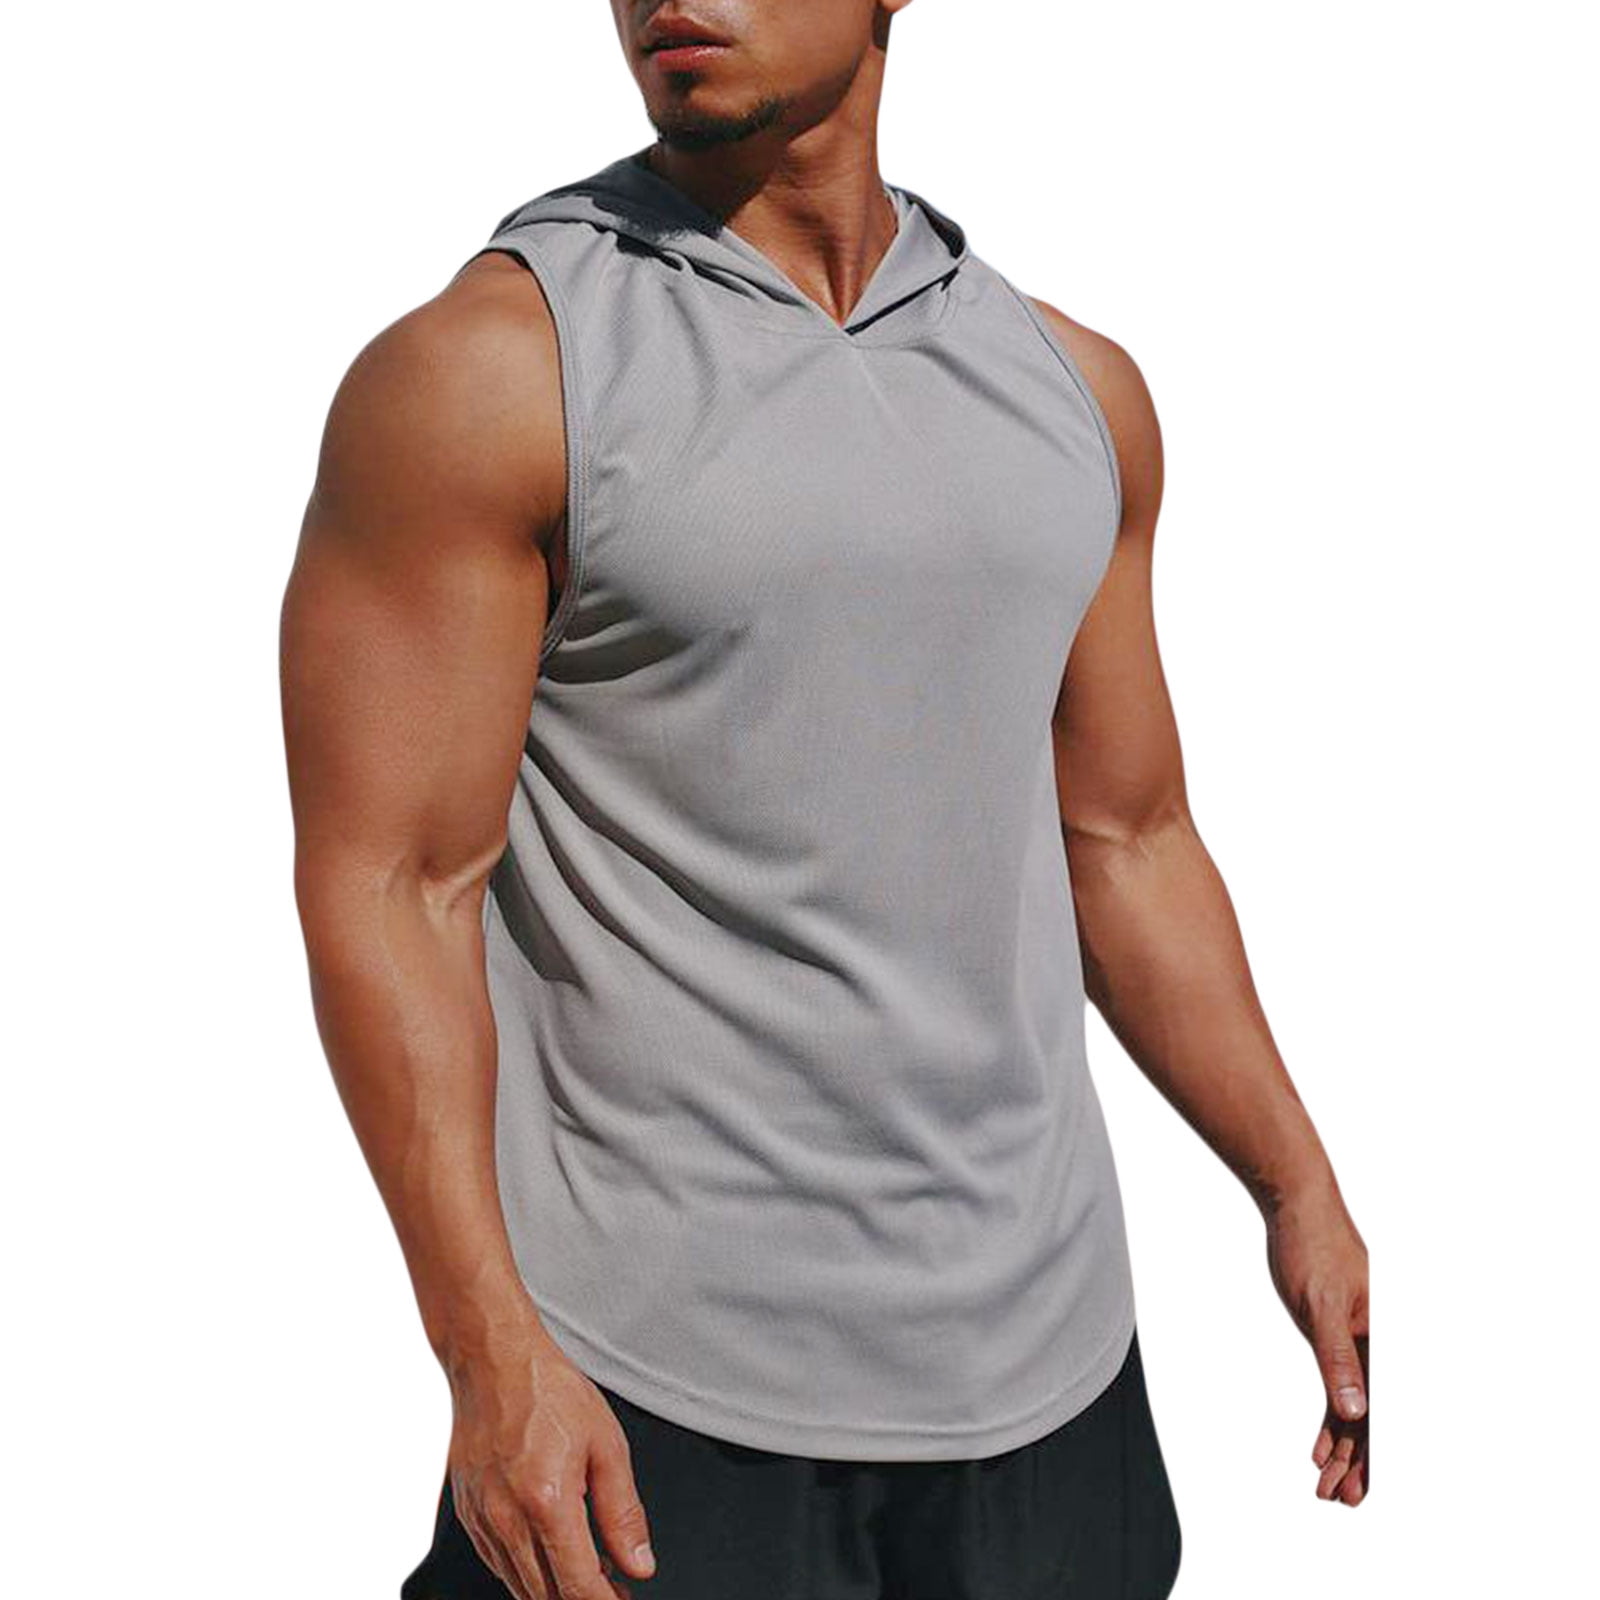 Shirts for Men Fashion Sleeveless Drawstring Hooded Shirt Summer Casual Loose Muscle Fit Workout Pullover T Shirt